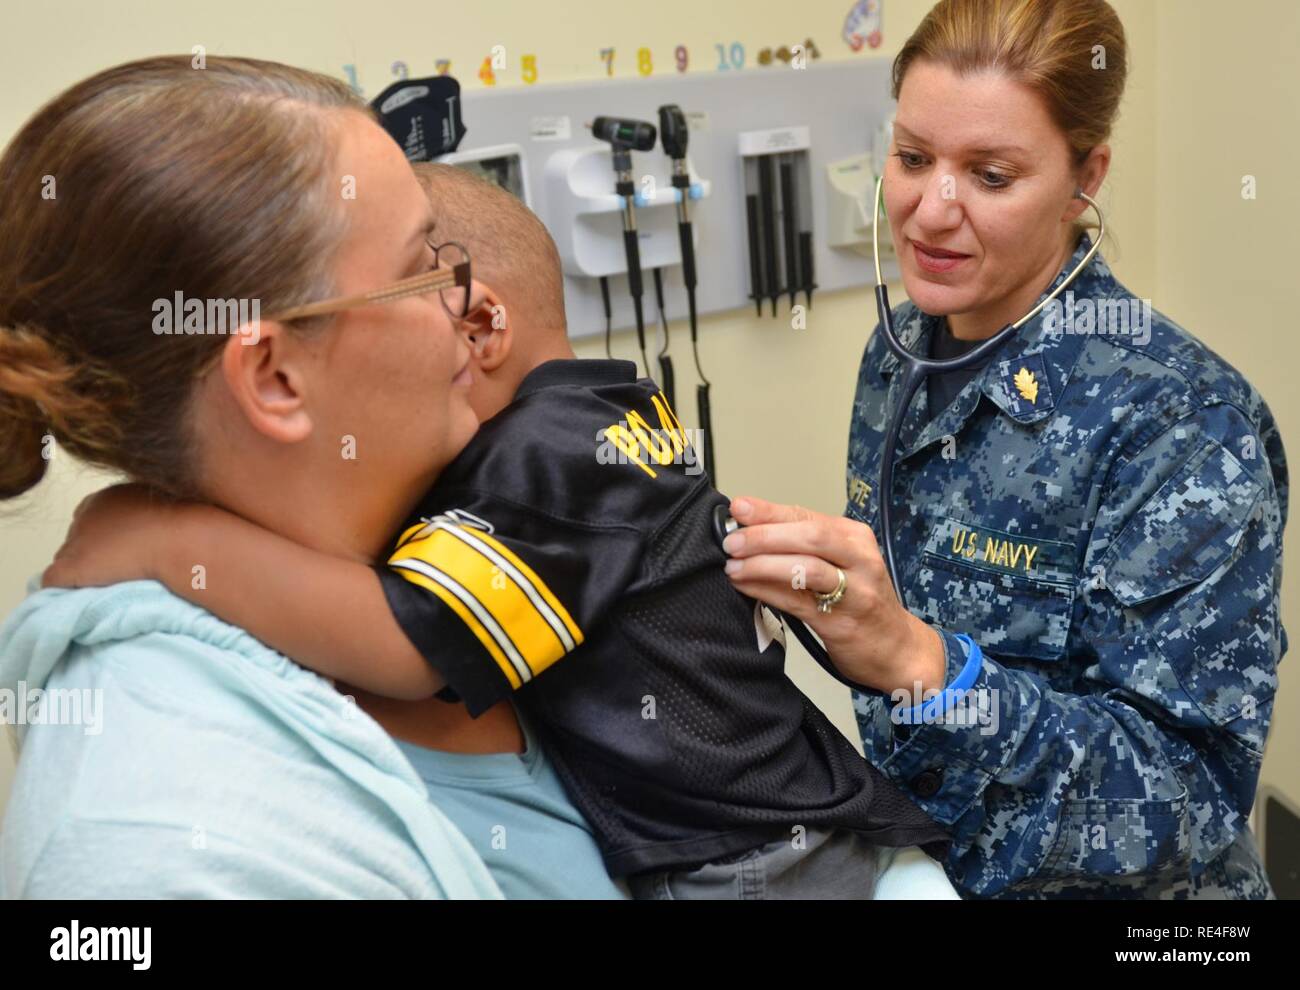 MAYPORT, Fla. (Nov. 10, 2016) – Capt. Mary White, a nurse practitioner at Naval Branch Health Clinic (NBHC) Mayport’s Pediatrics clinic, examines a child experiencing cold symptoms. NBHC Mayport is one of Naval Hospital Jacksonville’s six health care facilities located across Florida and Georgia. Of the clinics about 22,000 enrolled patients, more than 3,500 are enrolled at its Pediatrics clinic. Stock Photo